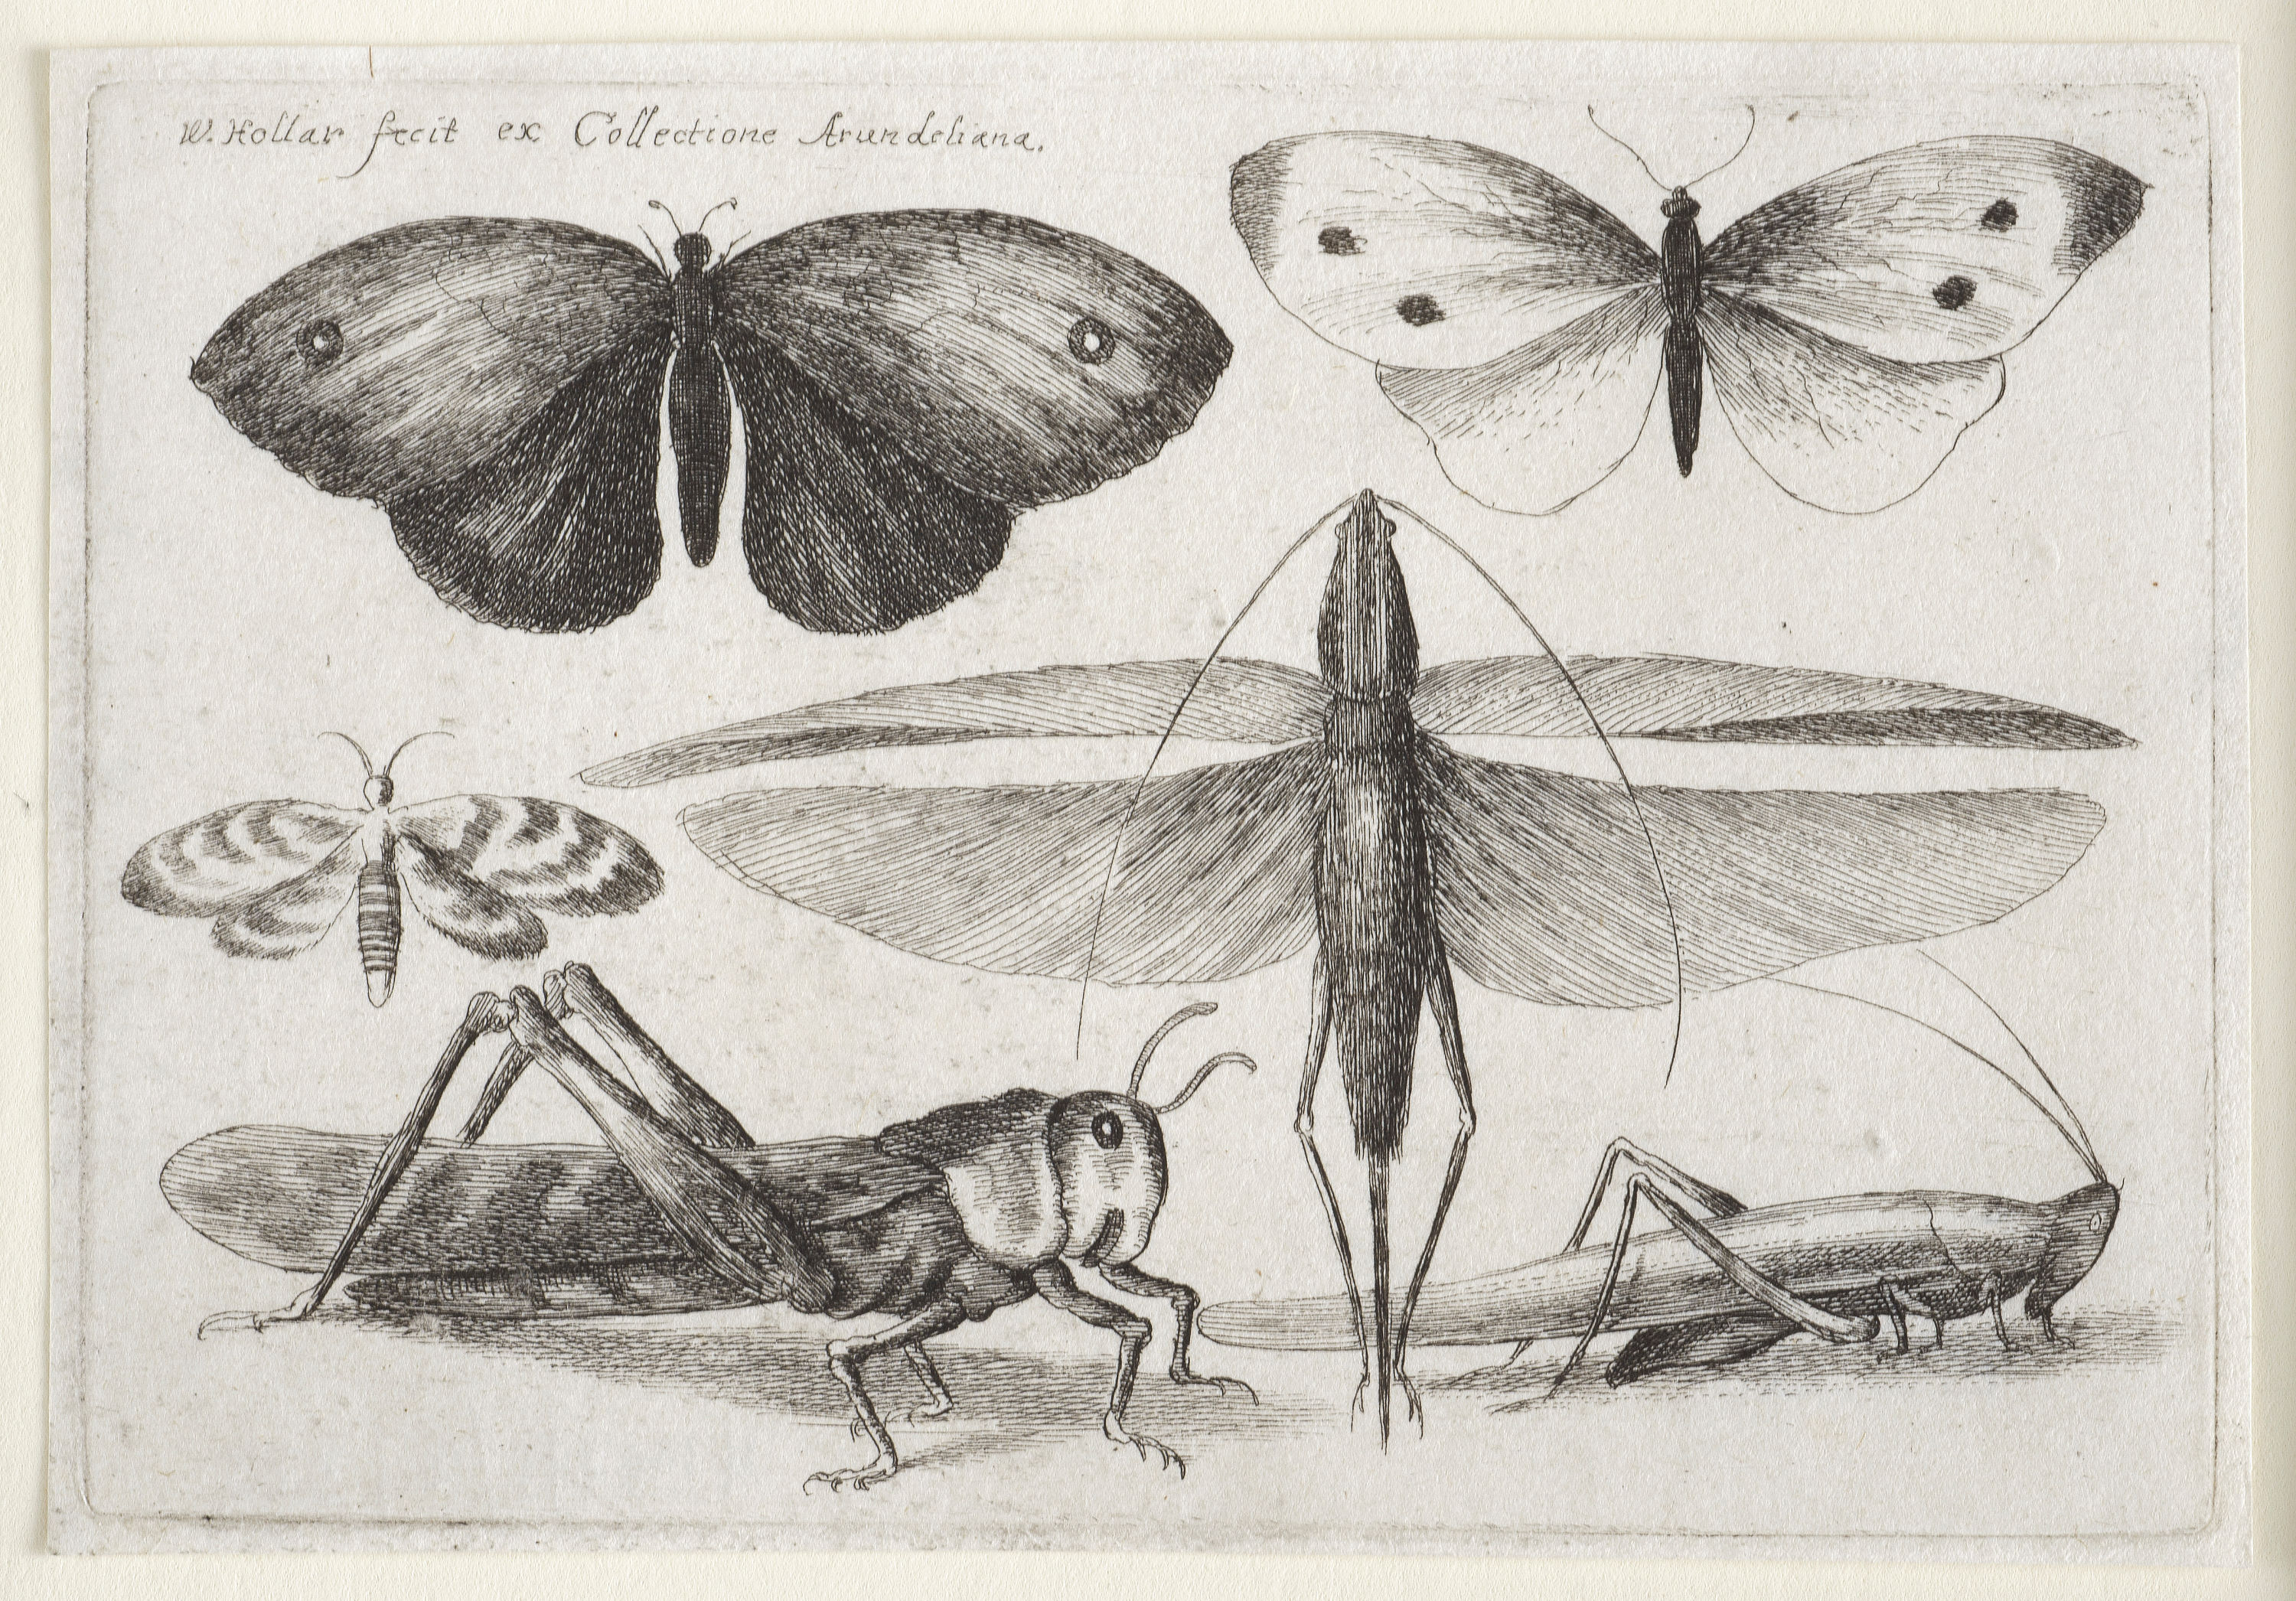 <p><strong>Wenceslaus Hollar&nbsp;</strong><br />
Six Insects 1646<br />
Mackelvie Trust Collection, Auckland Art Gallery Toi o Tāmaki<br />
bequest of Dr Walter Auburn, 1982</p>
